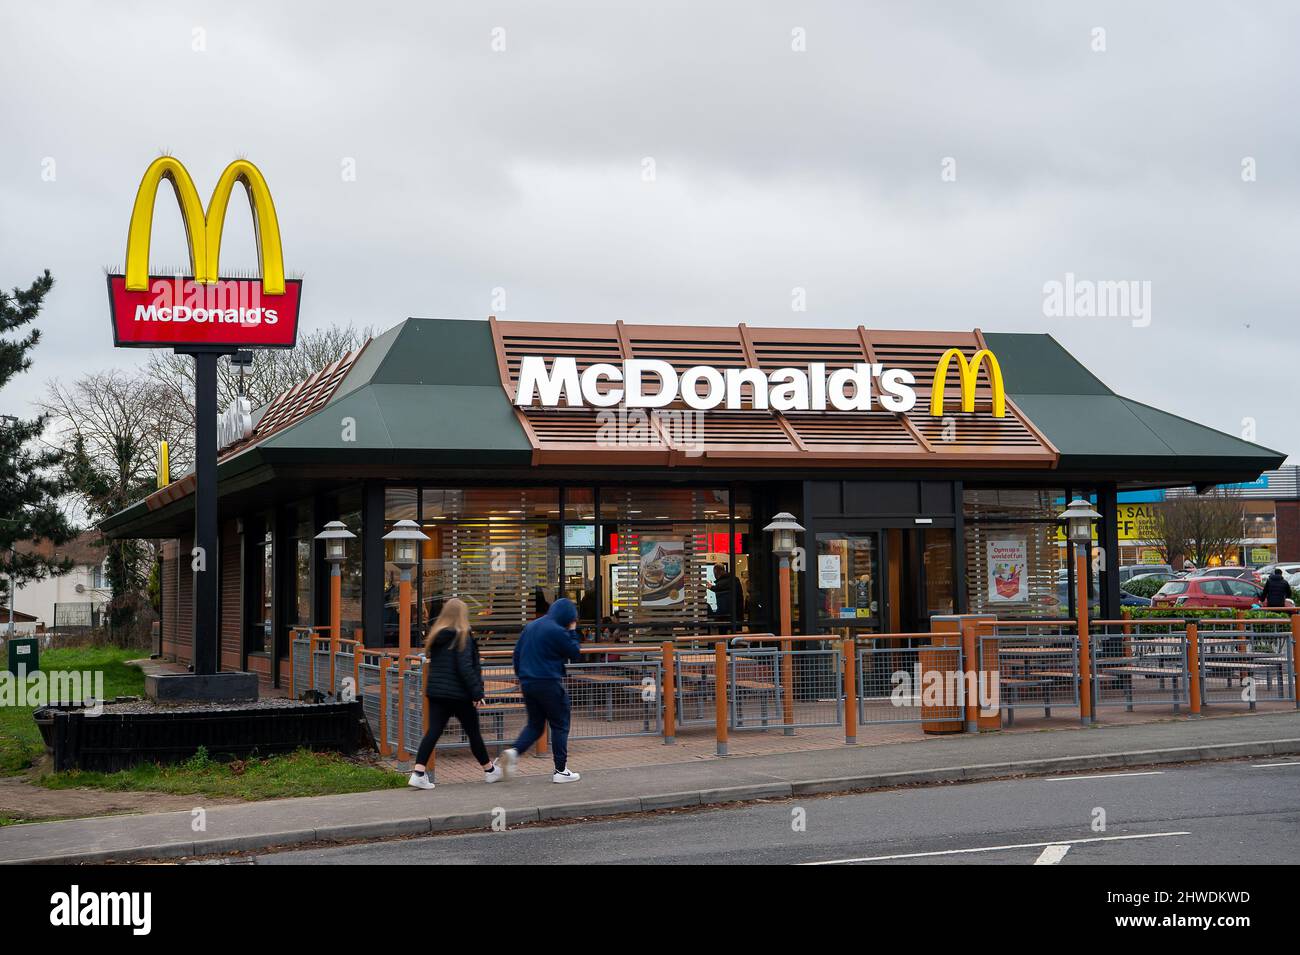 Slough, Berkshire, UK. 5th March, 2022. Following the Russian invasion of Ukraine, there calls for McDonald's to pause their operations in Russia. Boycott McDonald's has been trending on social media today. Credit: Maureen McLean/Alamy Live News Stock Photo